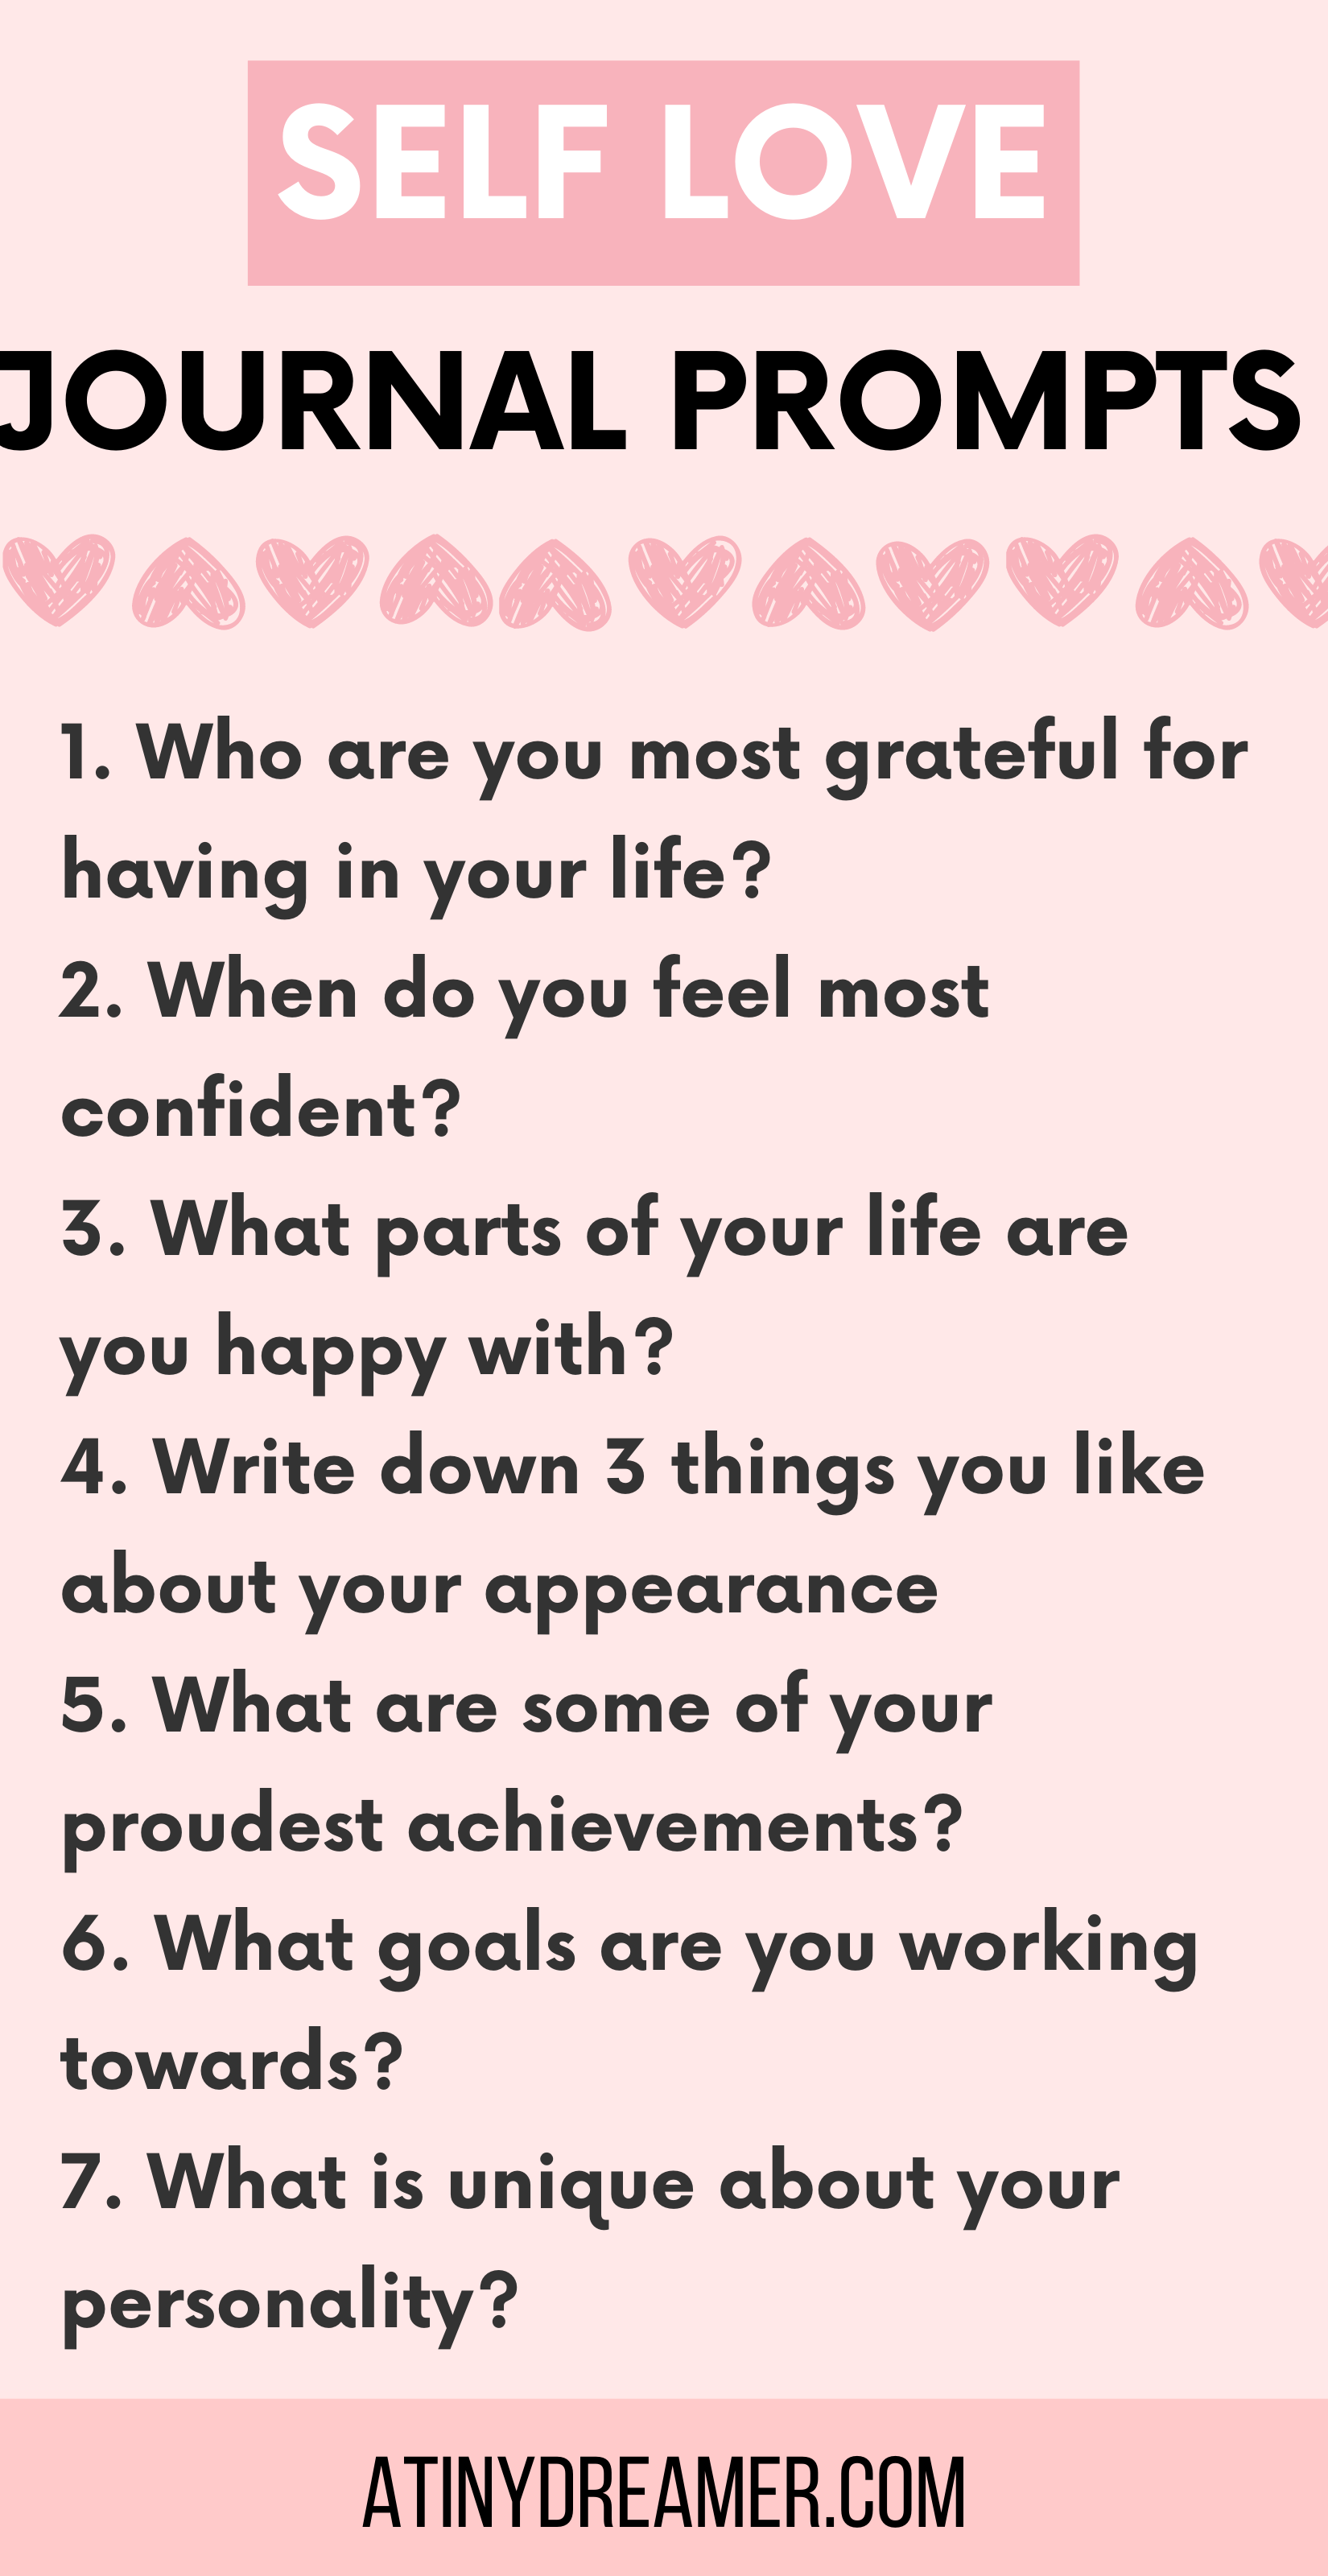 38 Wonderful Journal Prompts for Self Love - atinydreamer